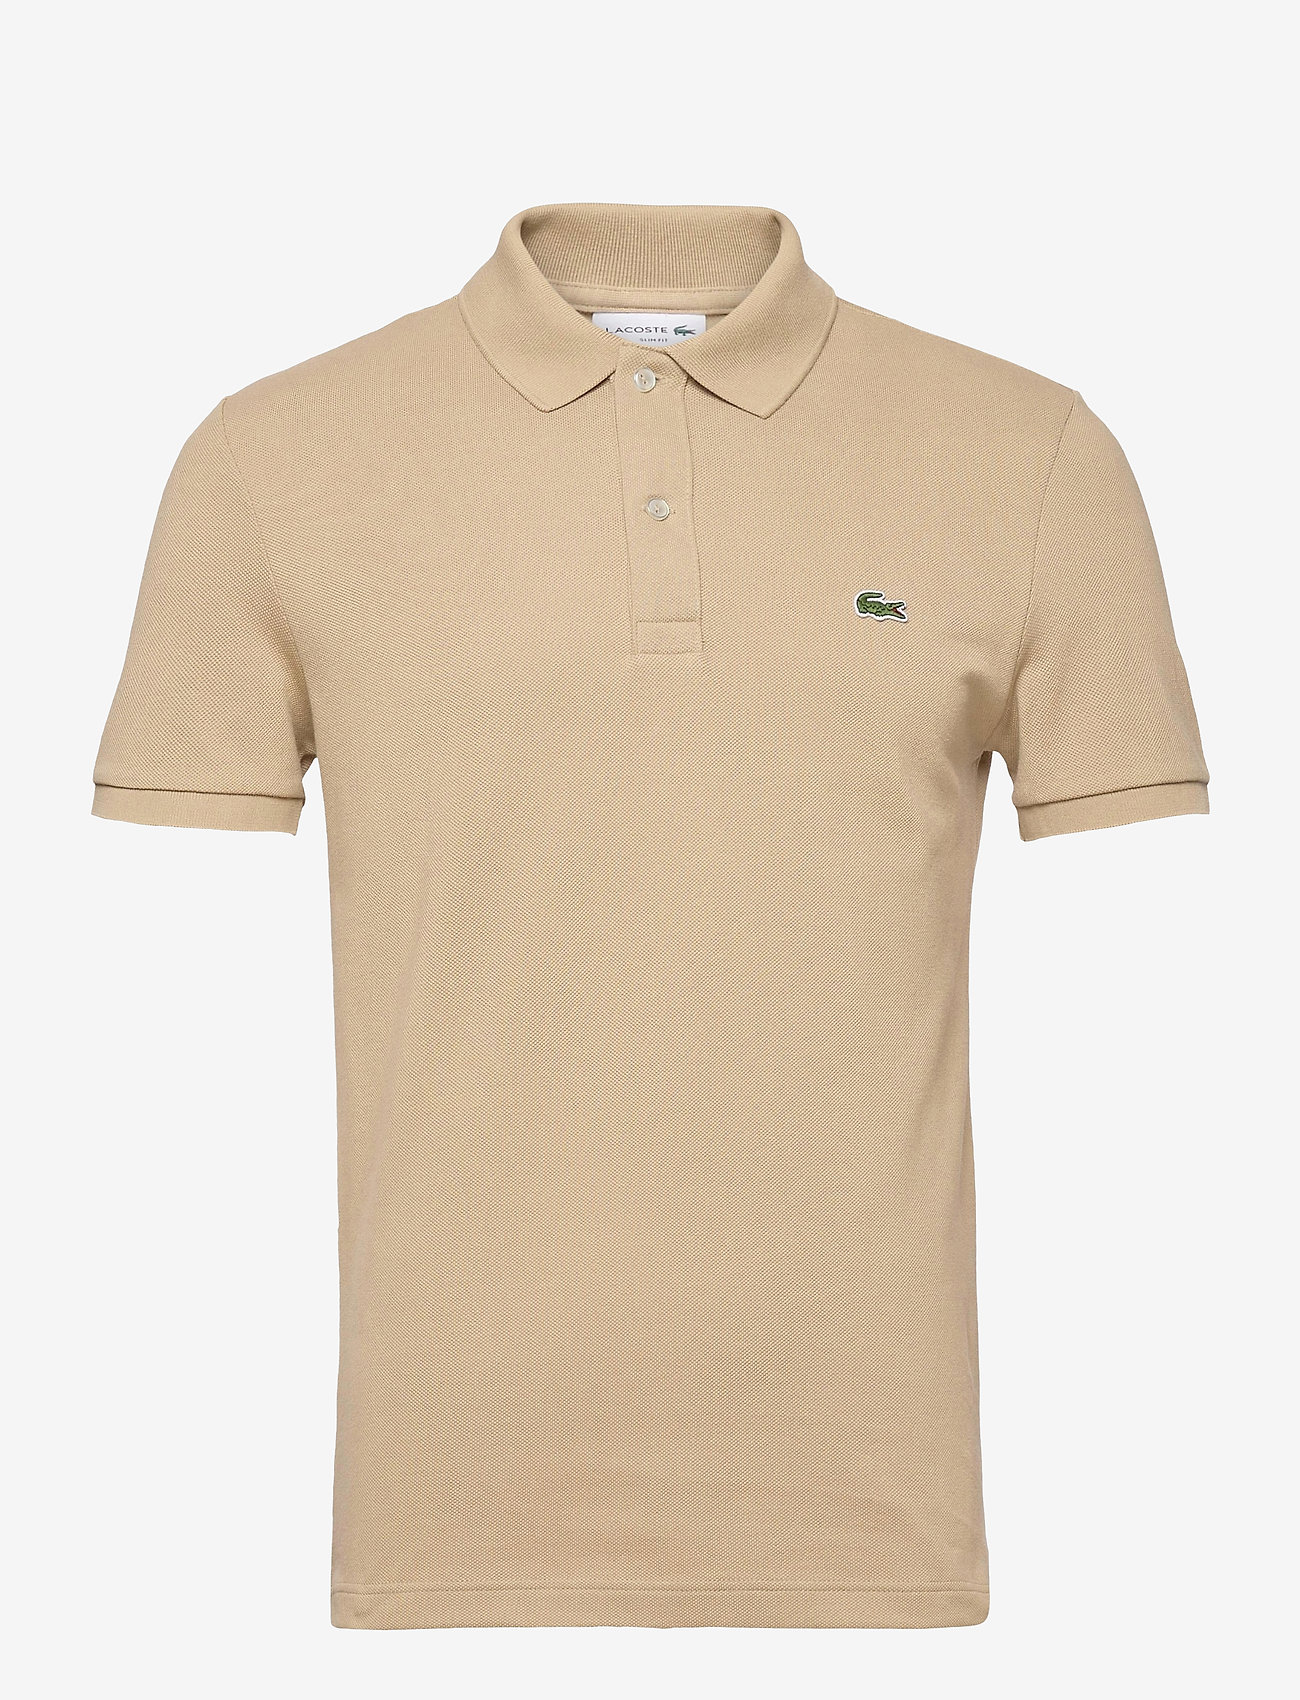 washing lacoste polos